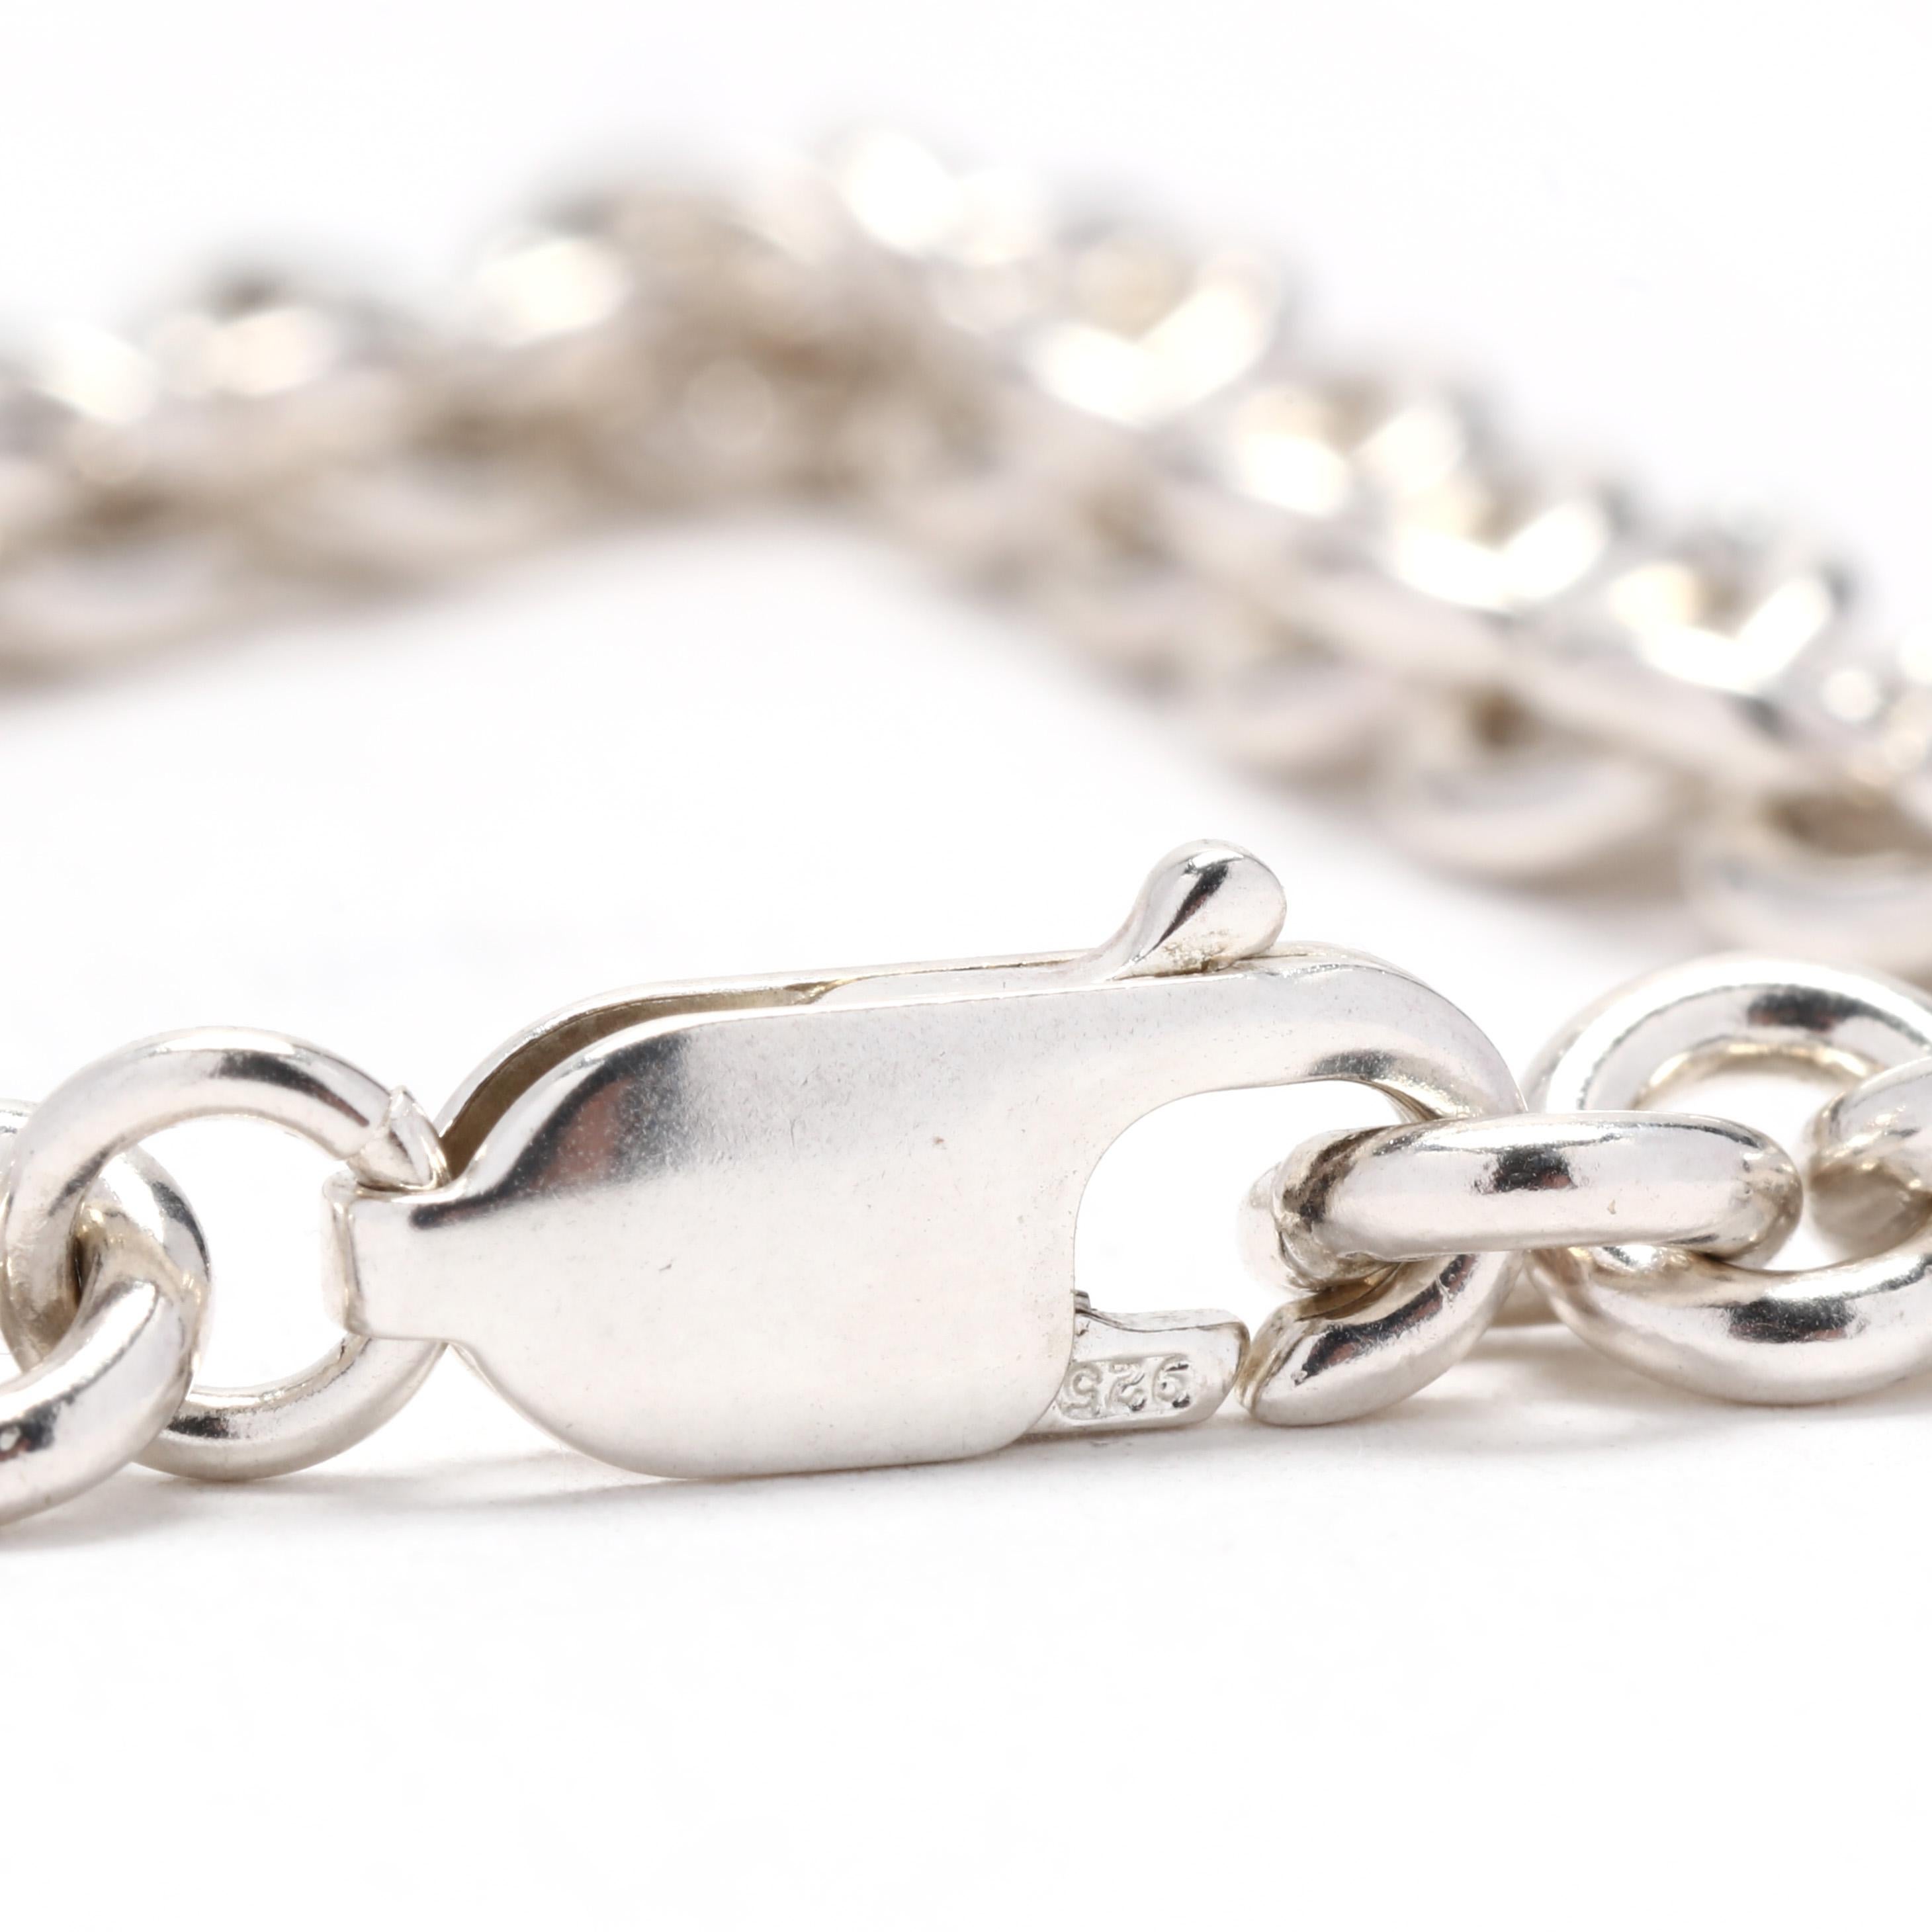 A sterling silver rolo link chain bracelet.  This bracelet is comprised of round link rolo chain links and completed with a lobster clasp.  It is stamped 925.

Length: 7 3/8 inches

Width: 1/4 inch

Weight: 9.6 dwt / 14.8 grams

Metal: Sterling